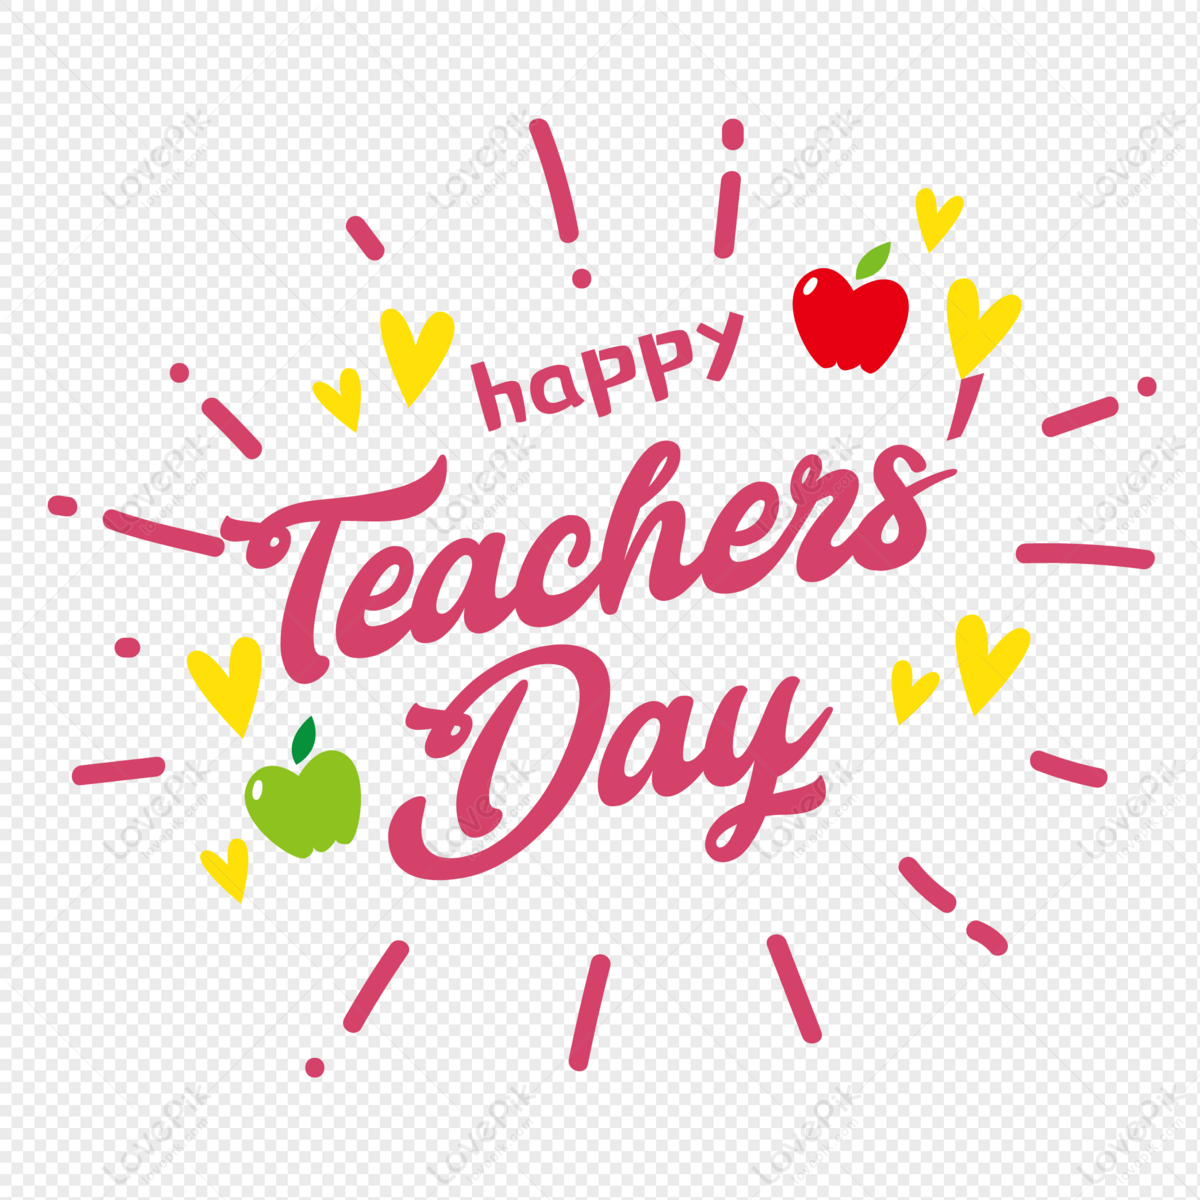 Happy Teachers Day PNG Images With Transparent Background | Free ...